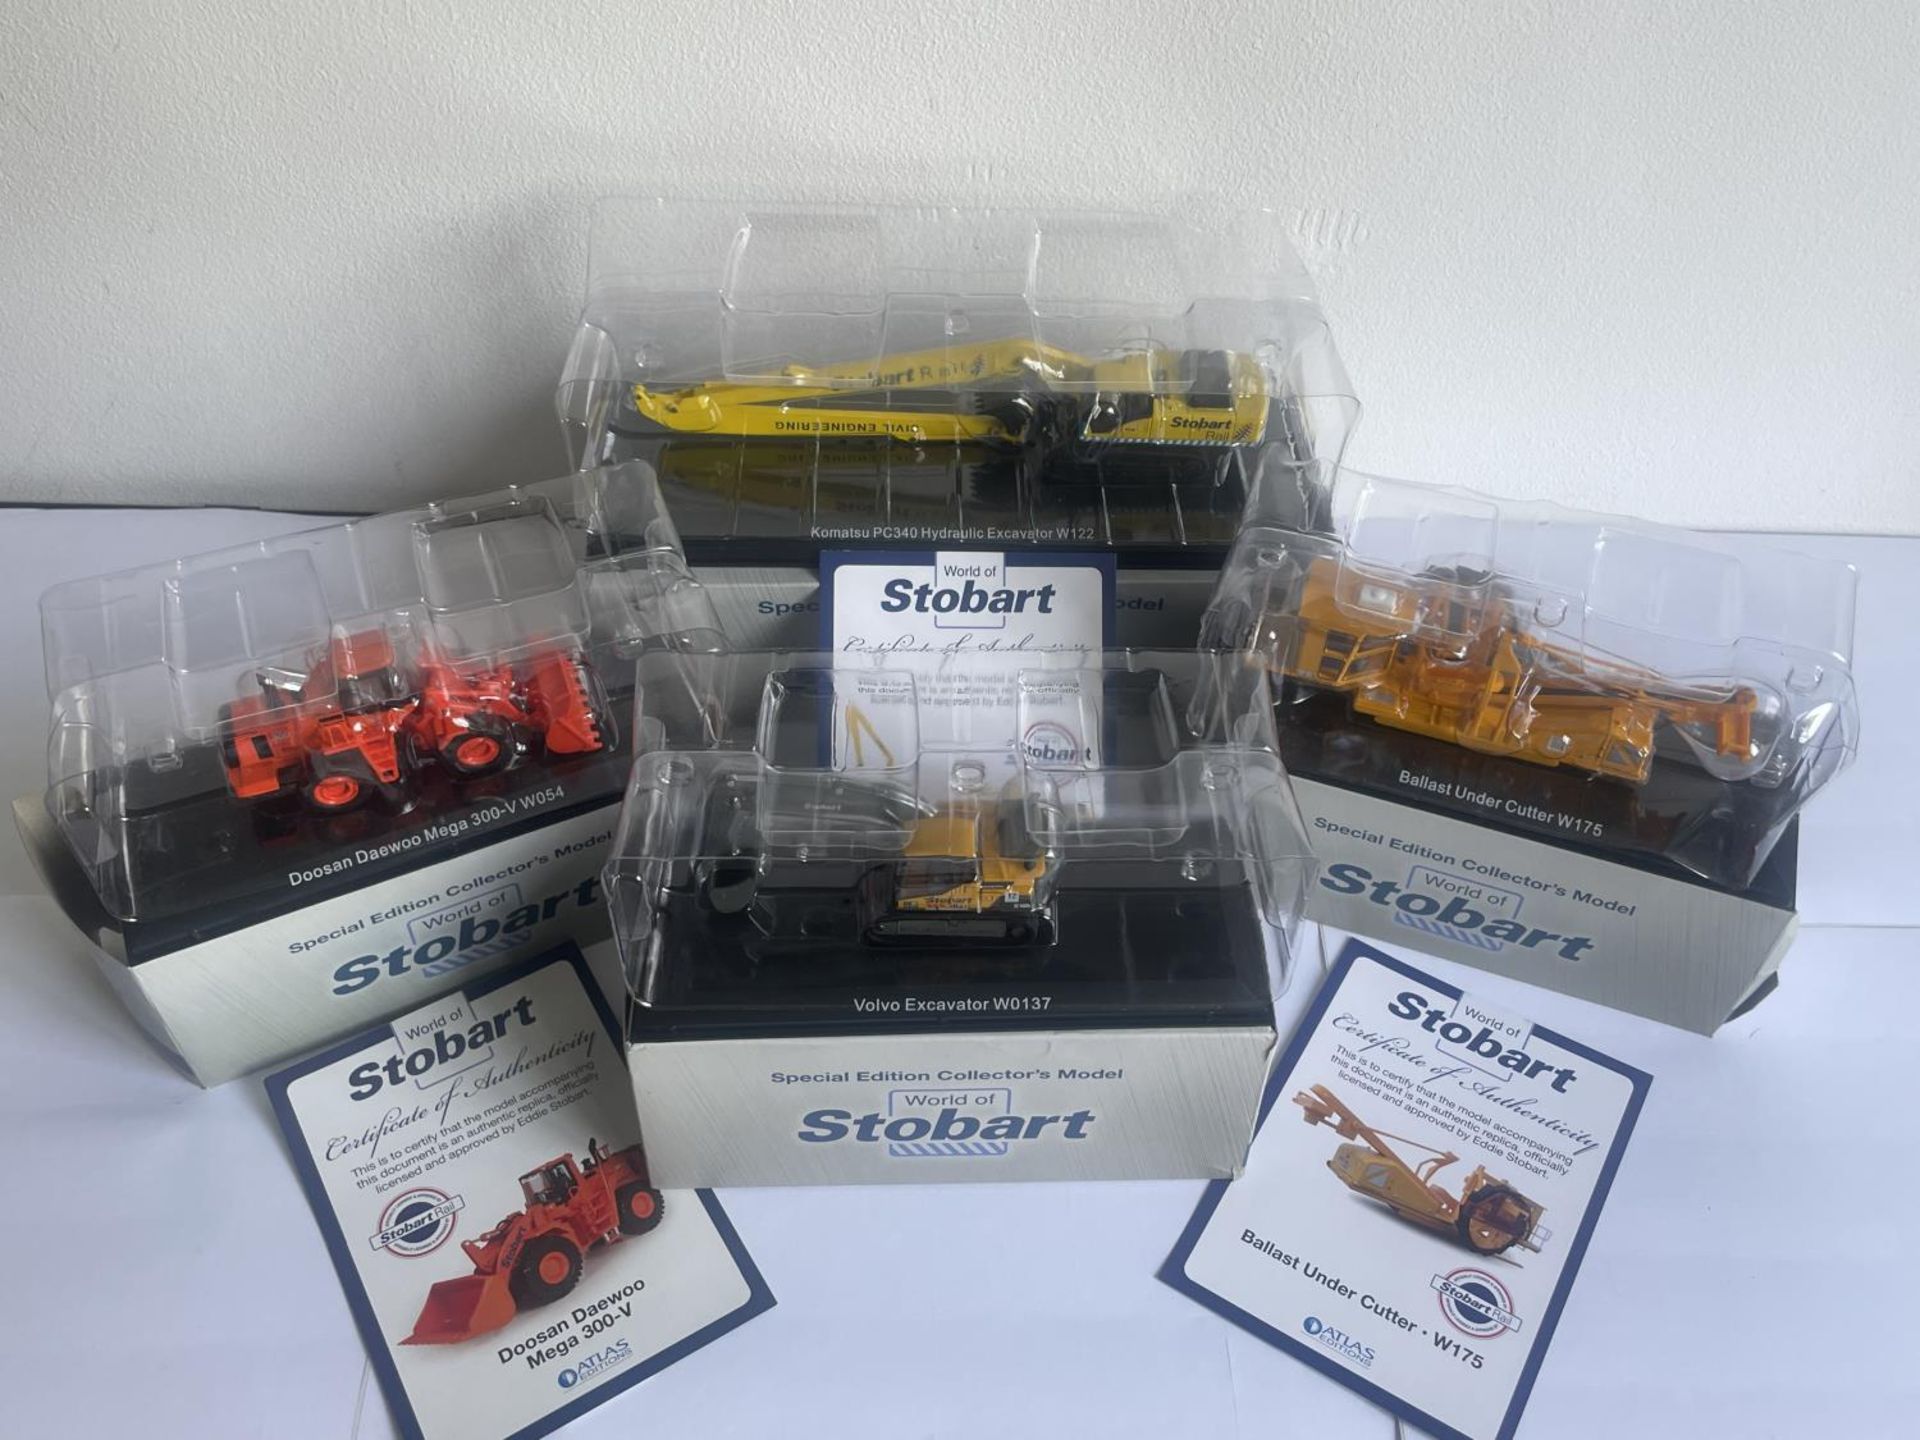 FOUR BOXED STOBART MODELS OF EXCAVATORS SOME WITH COA